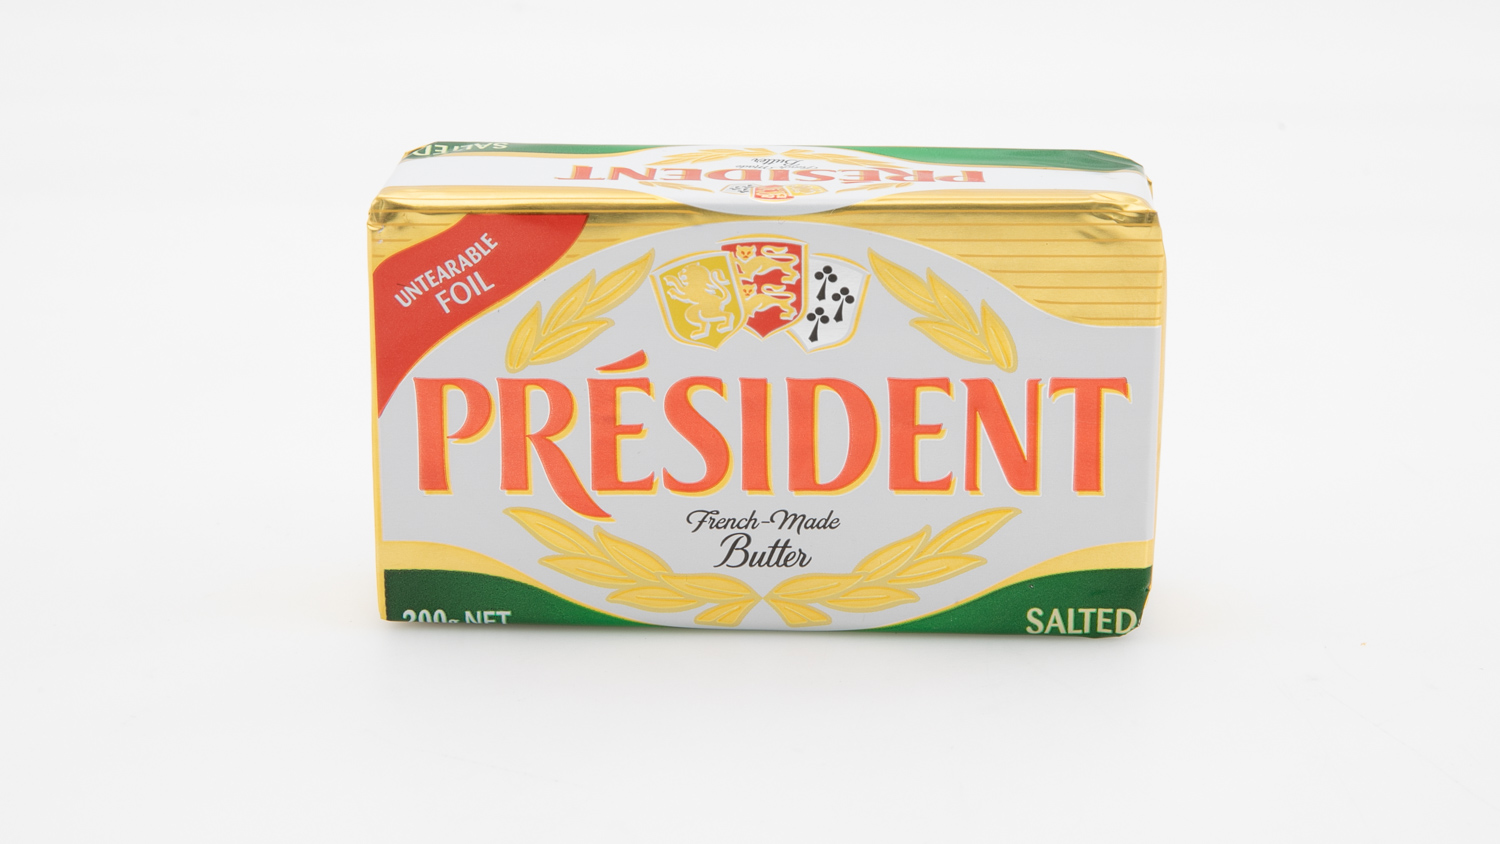 President French Made Salted Butter carousel image